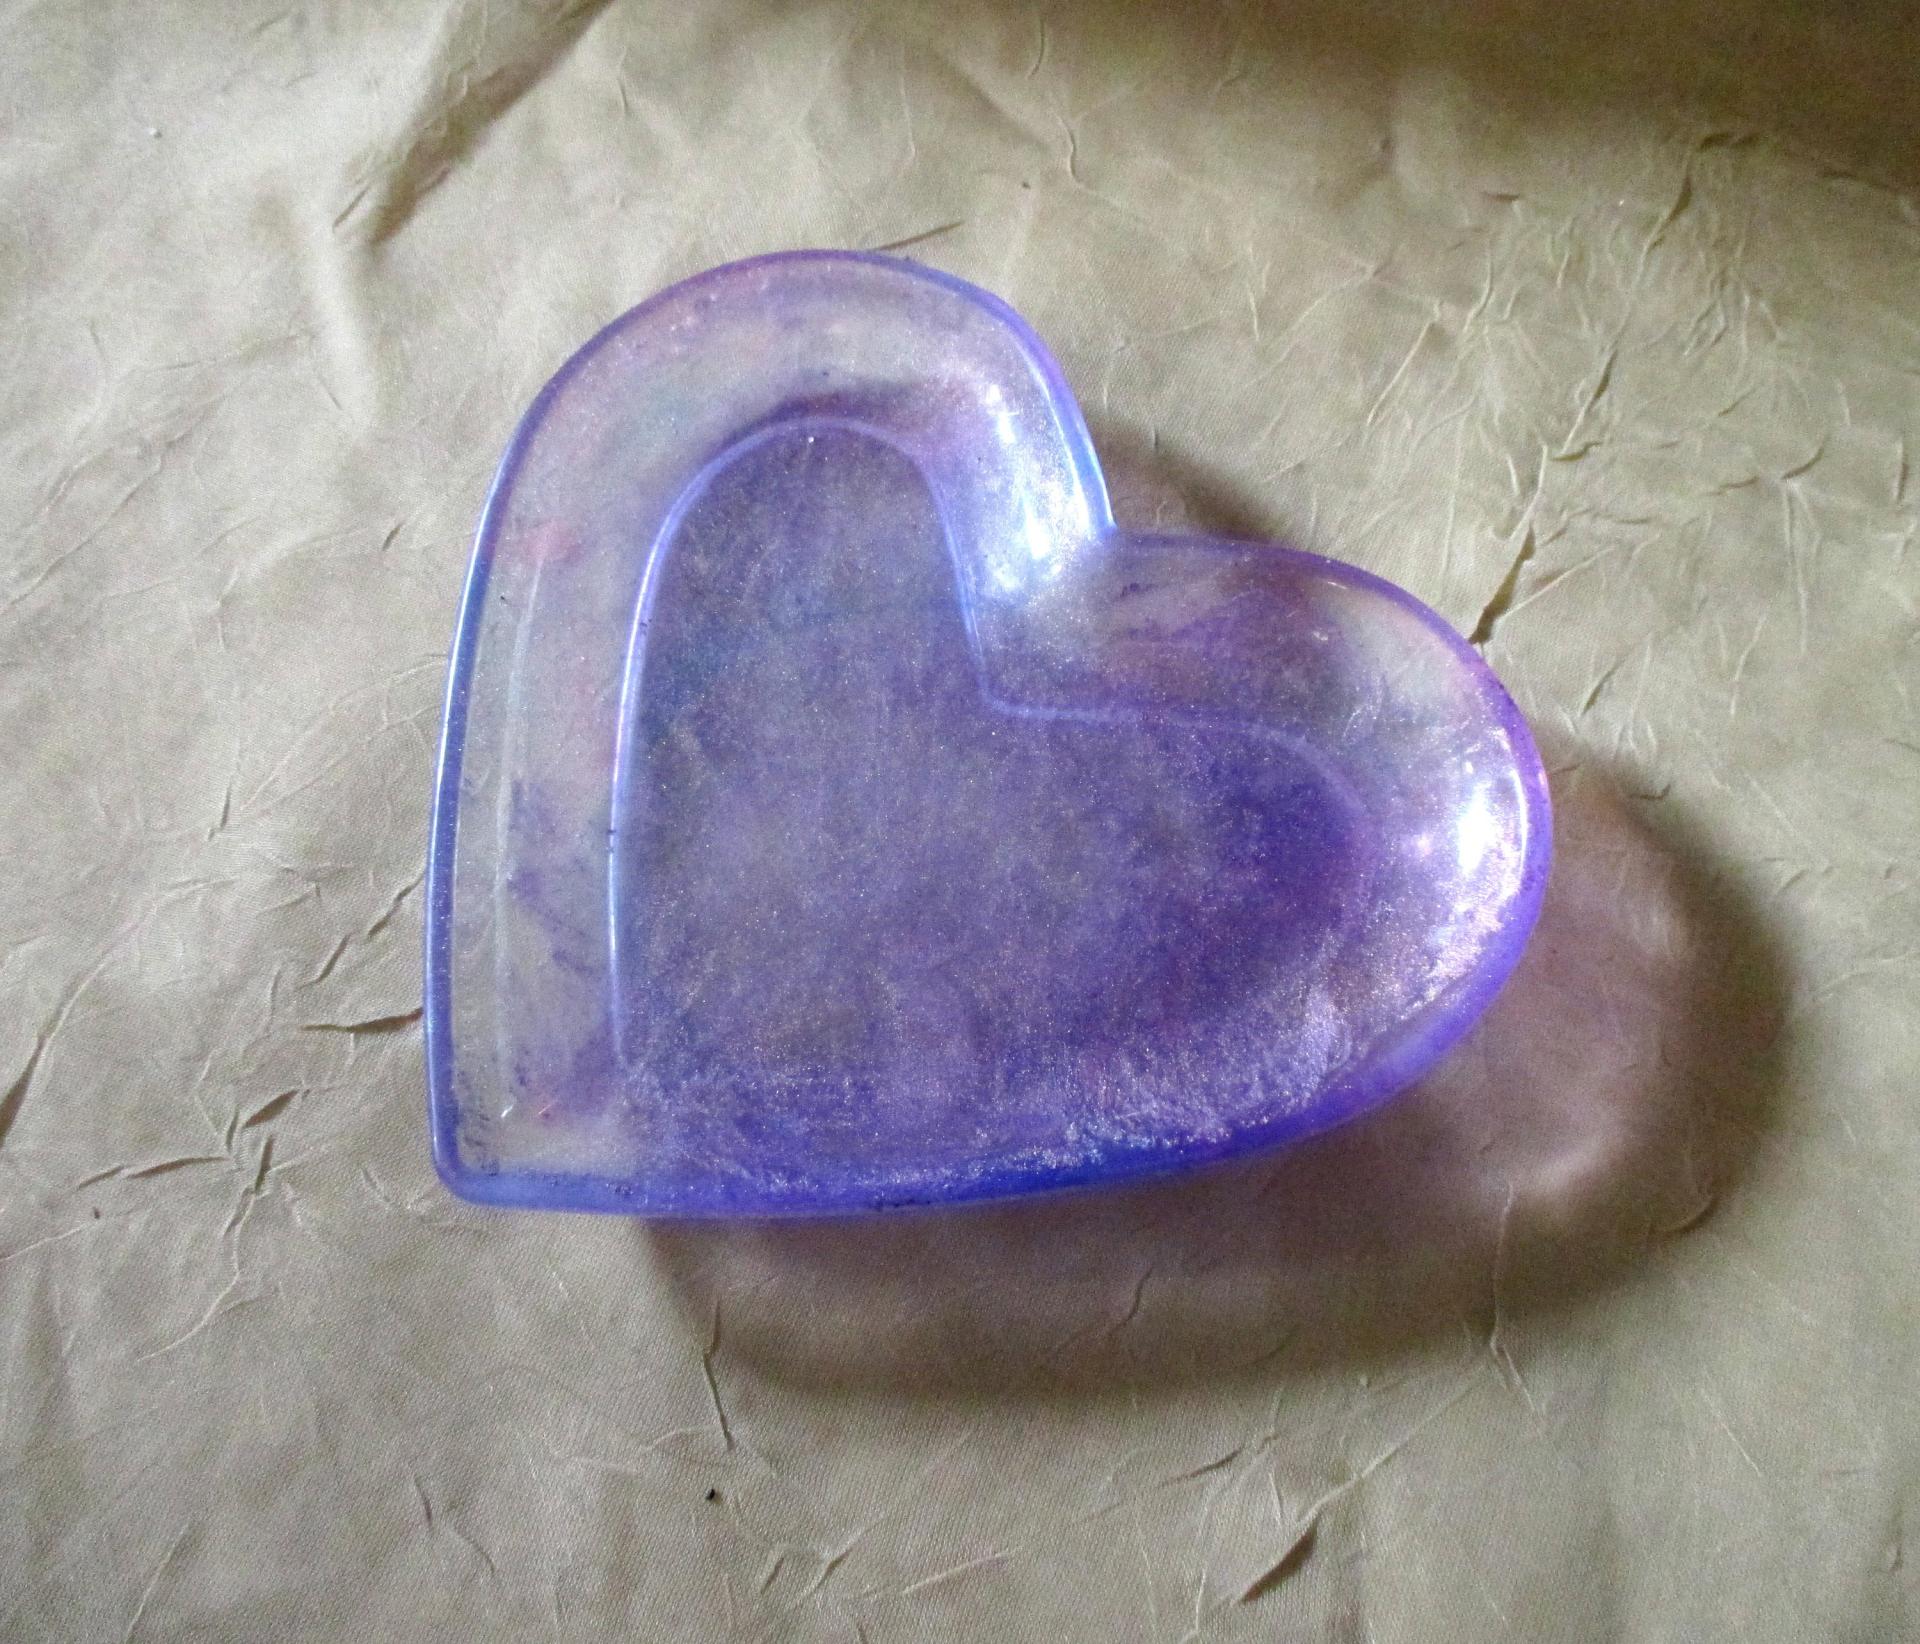 Molds - Heart Tray Casting Mold - for Epoxy, Clay or other casting medium